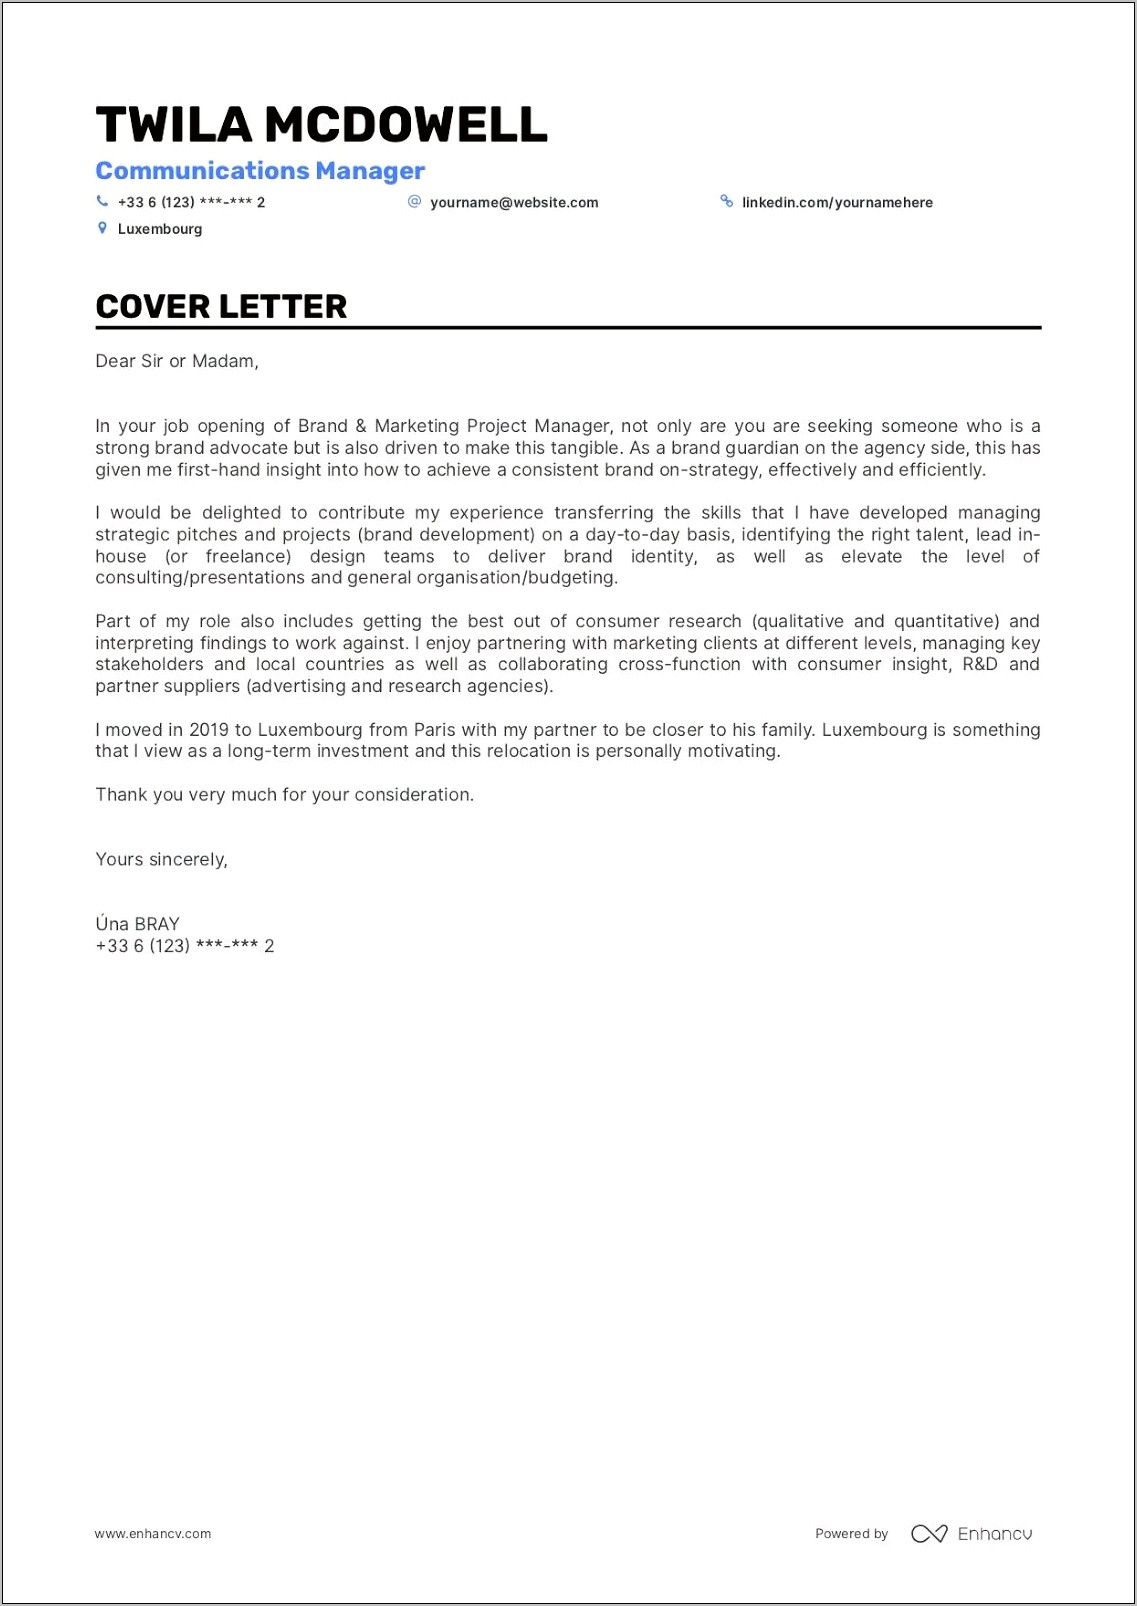 Development Of Resume And Covering Letter